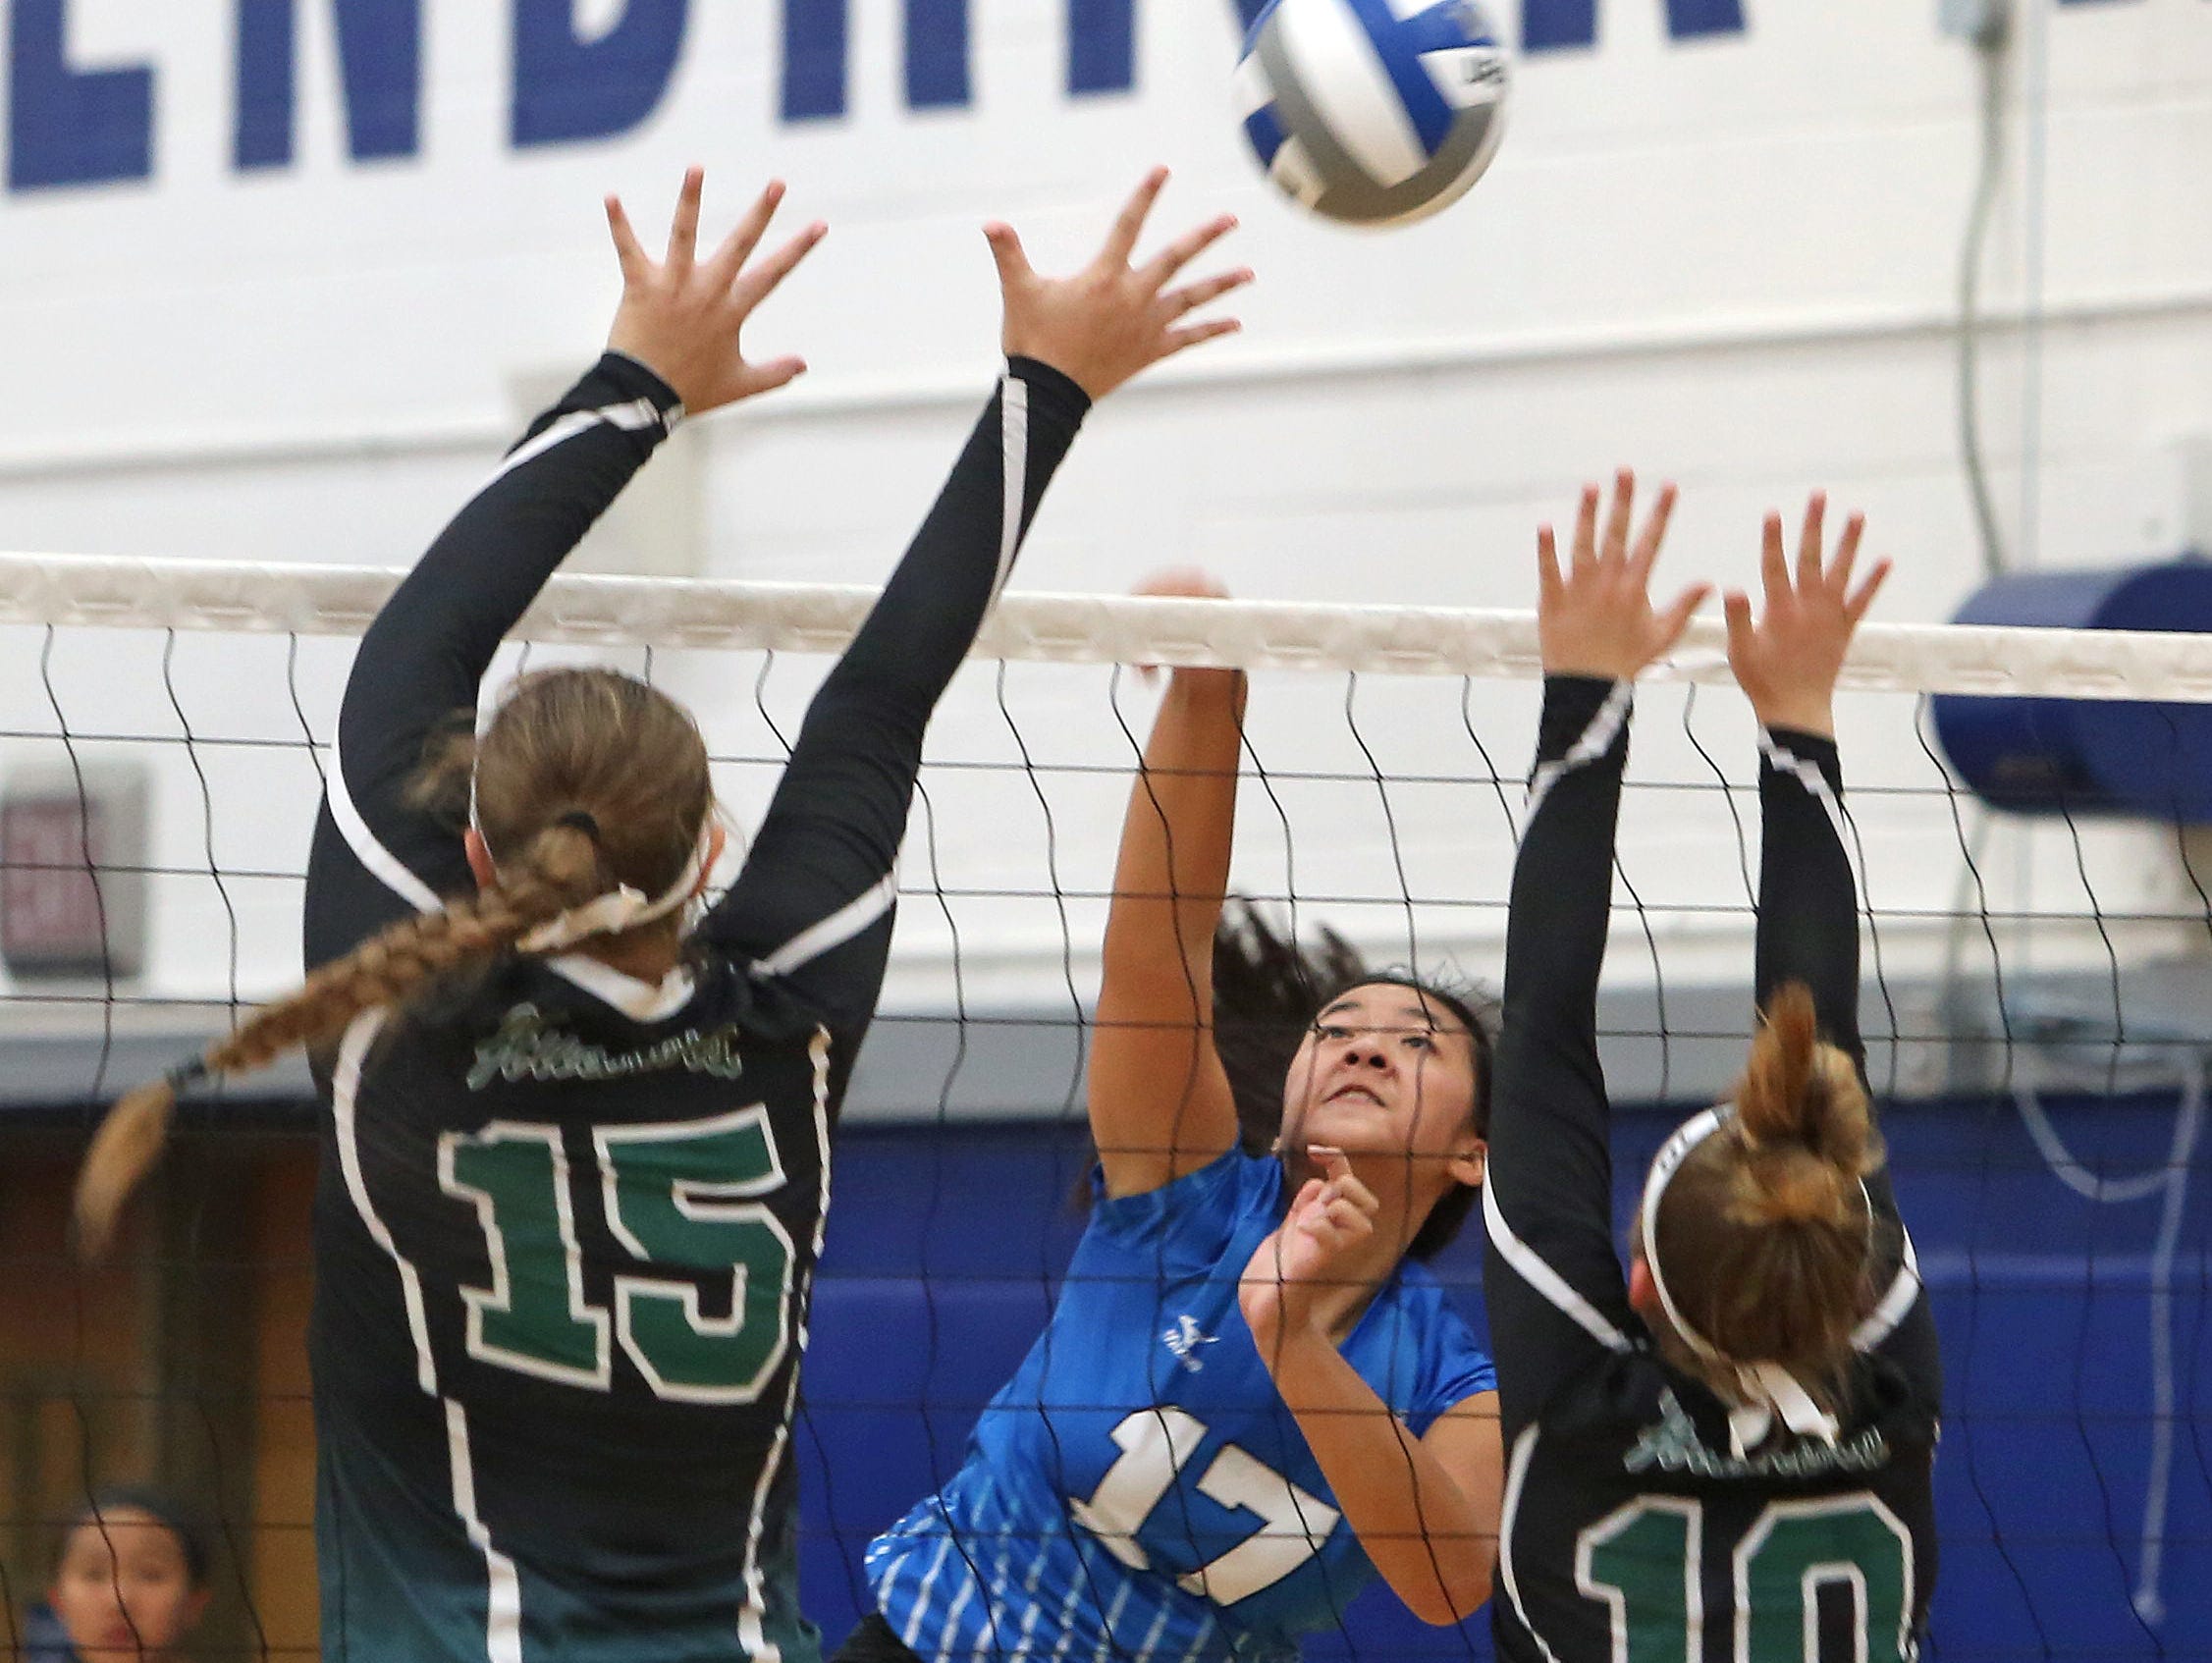 Hendrick Hudson's Kristin Loh (17) gets a shot by Yorktown's Toni Fiore (15) and Macey Dresek (10) during volleyball action at Hendrick Hudson High School in Montrose Sept. 10, 2015. The Sailors took all three games.